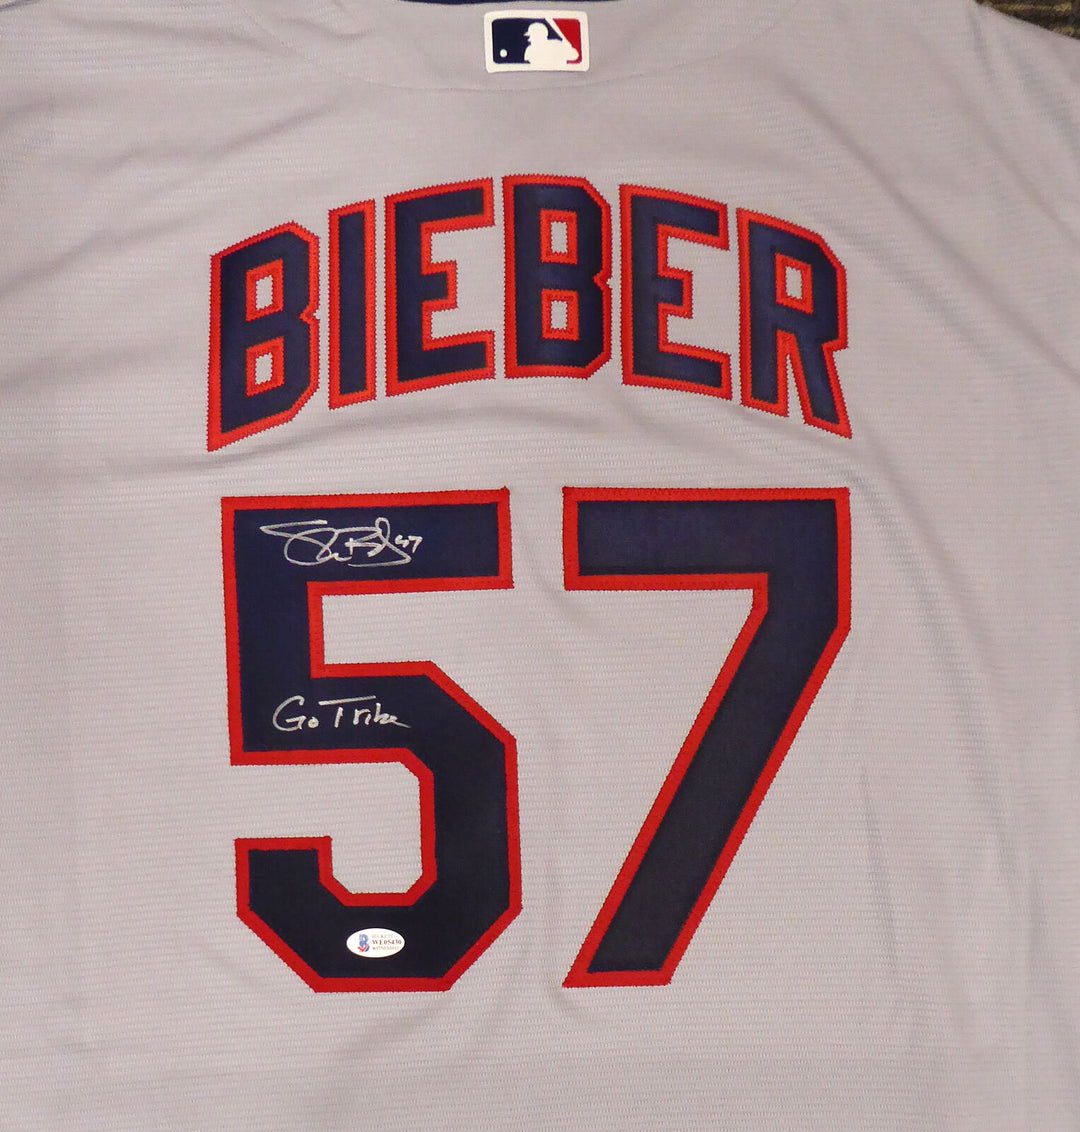 INDIANS SHANE BIEBER AUTOGRAPHED GRAY NIKE JERSEY XL "GO TRIBE" BECKETT 187725 Image 1